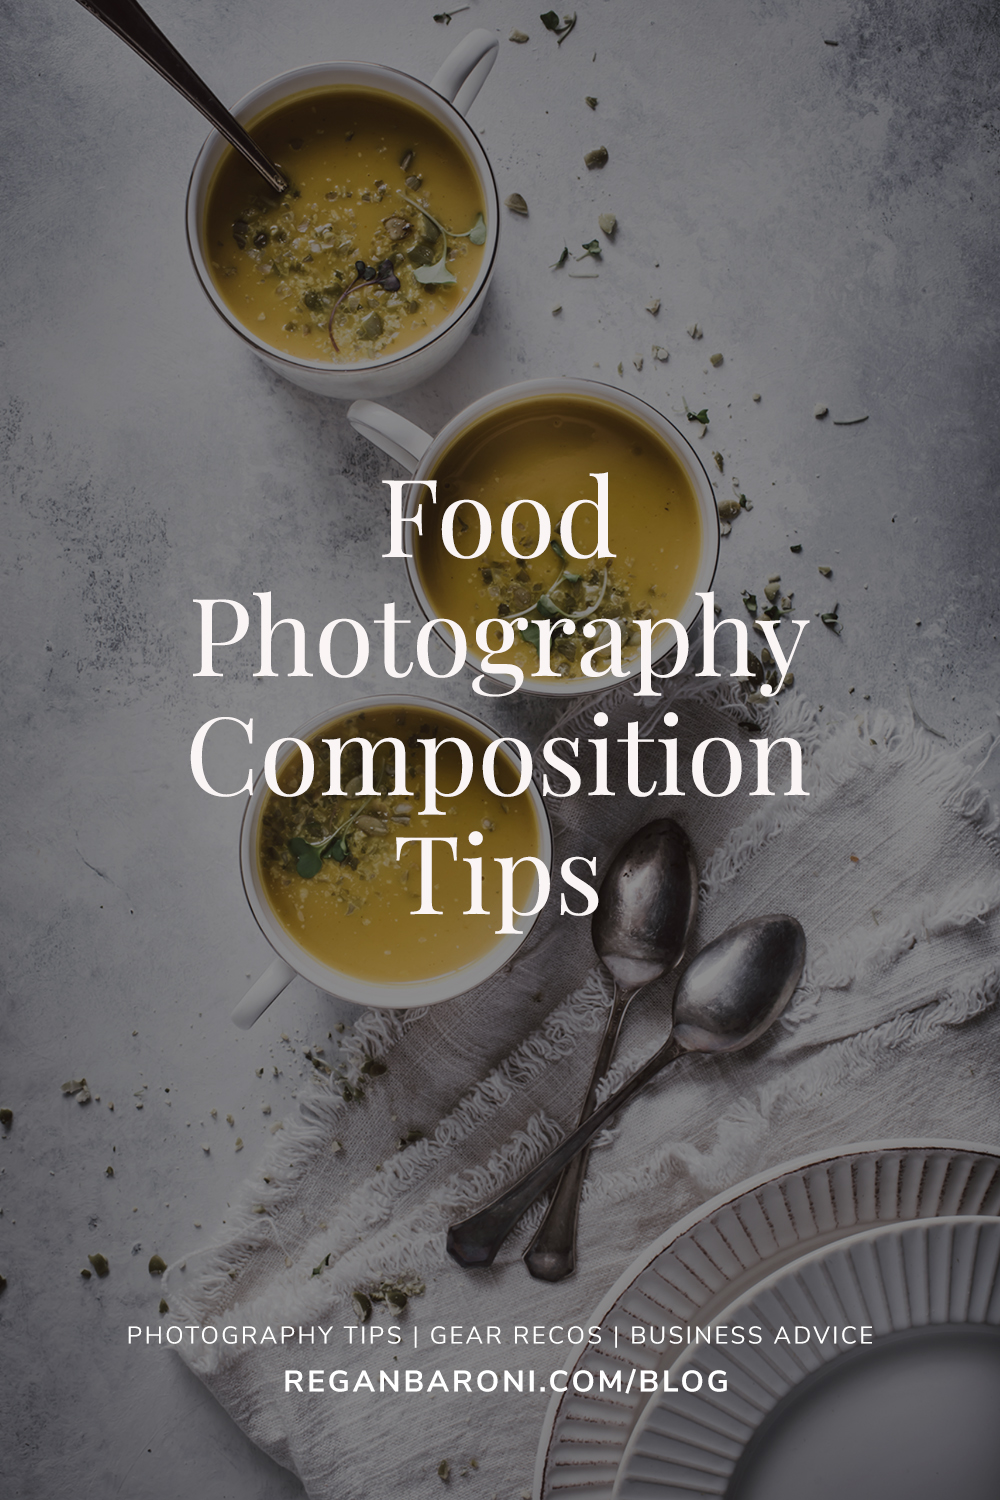 Food Photography Composition Tips